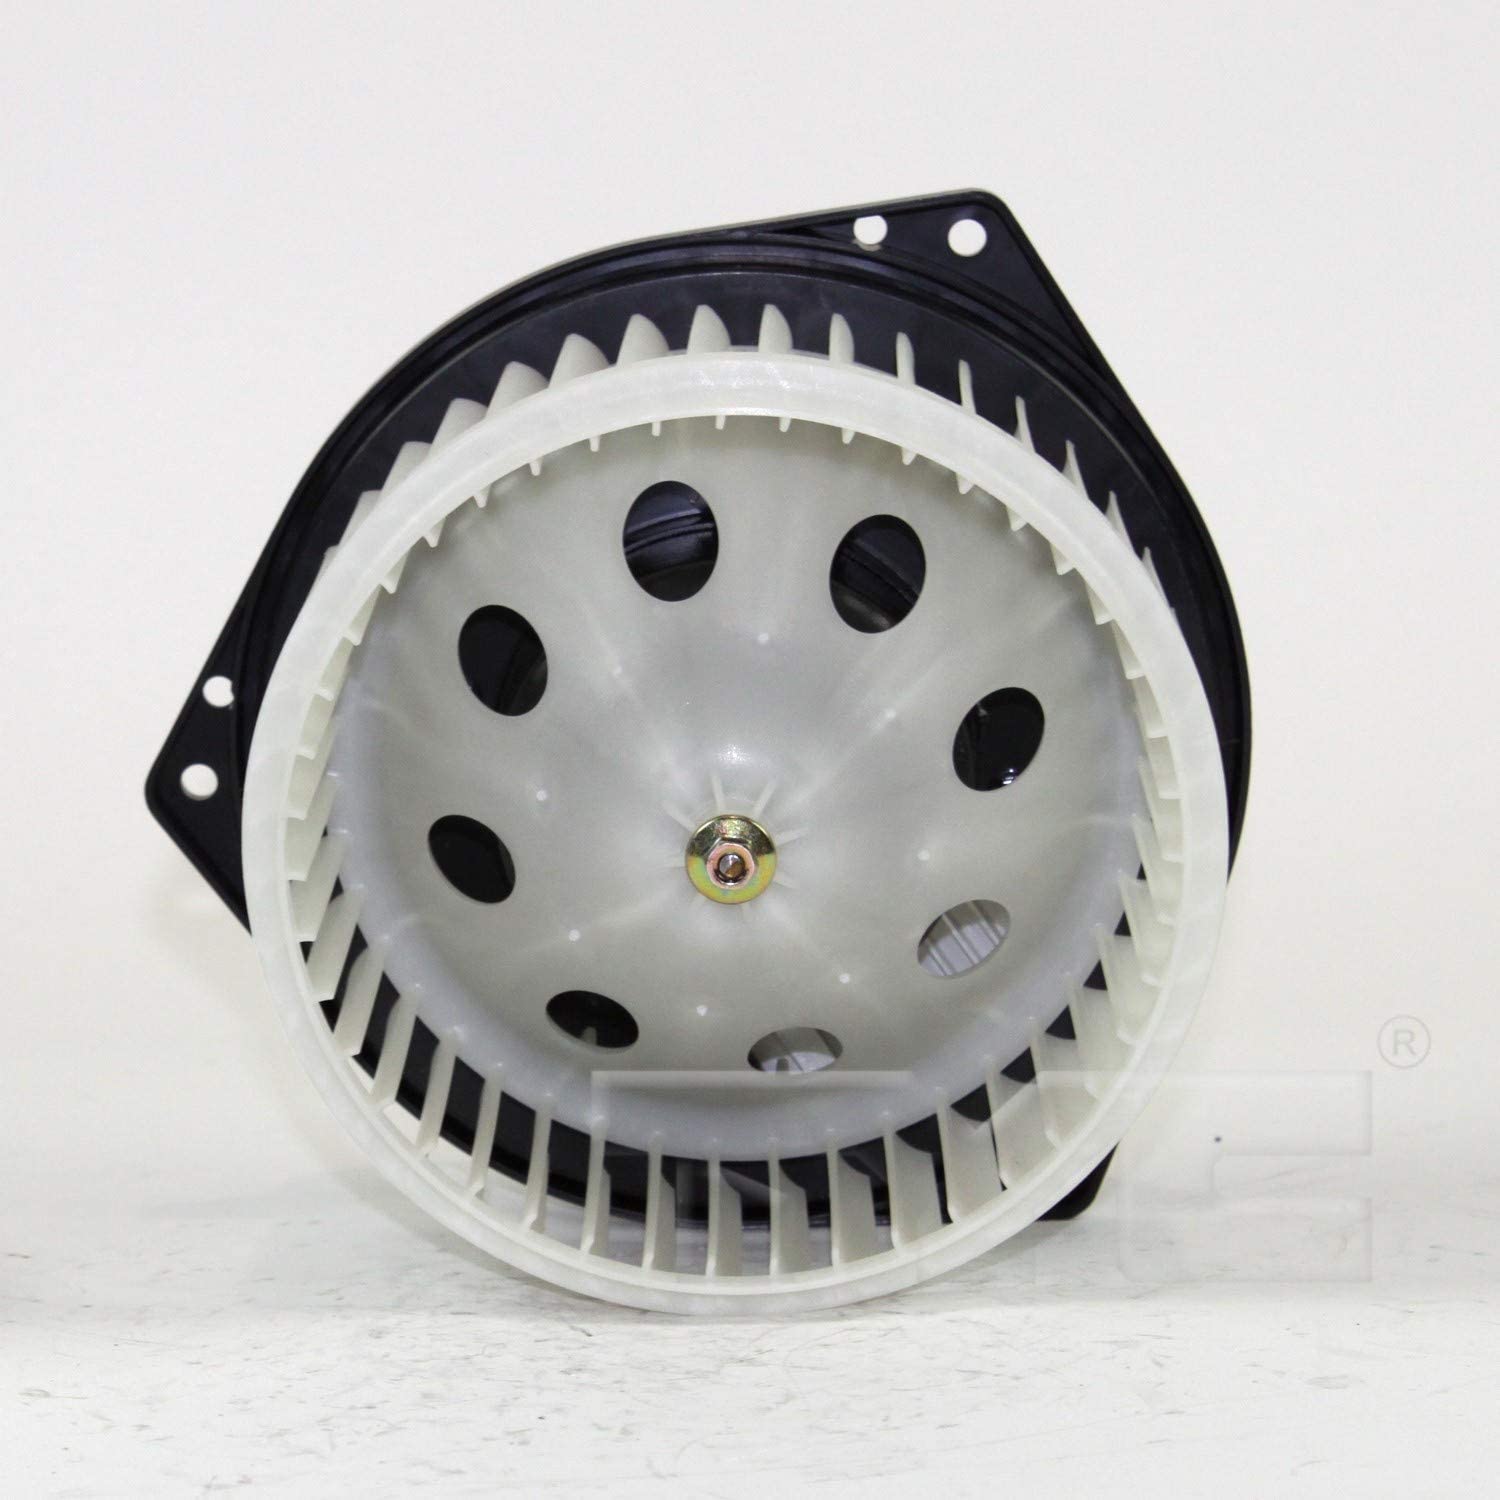 TYC - Front HVAC Blower Motor For 2016 Infiniti Q50 - Premium Quanlity With One Year Warranty